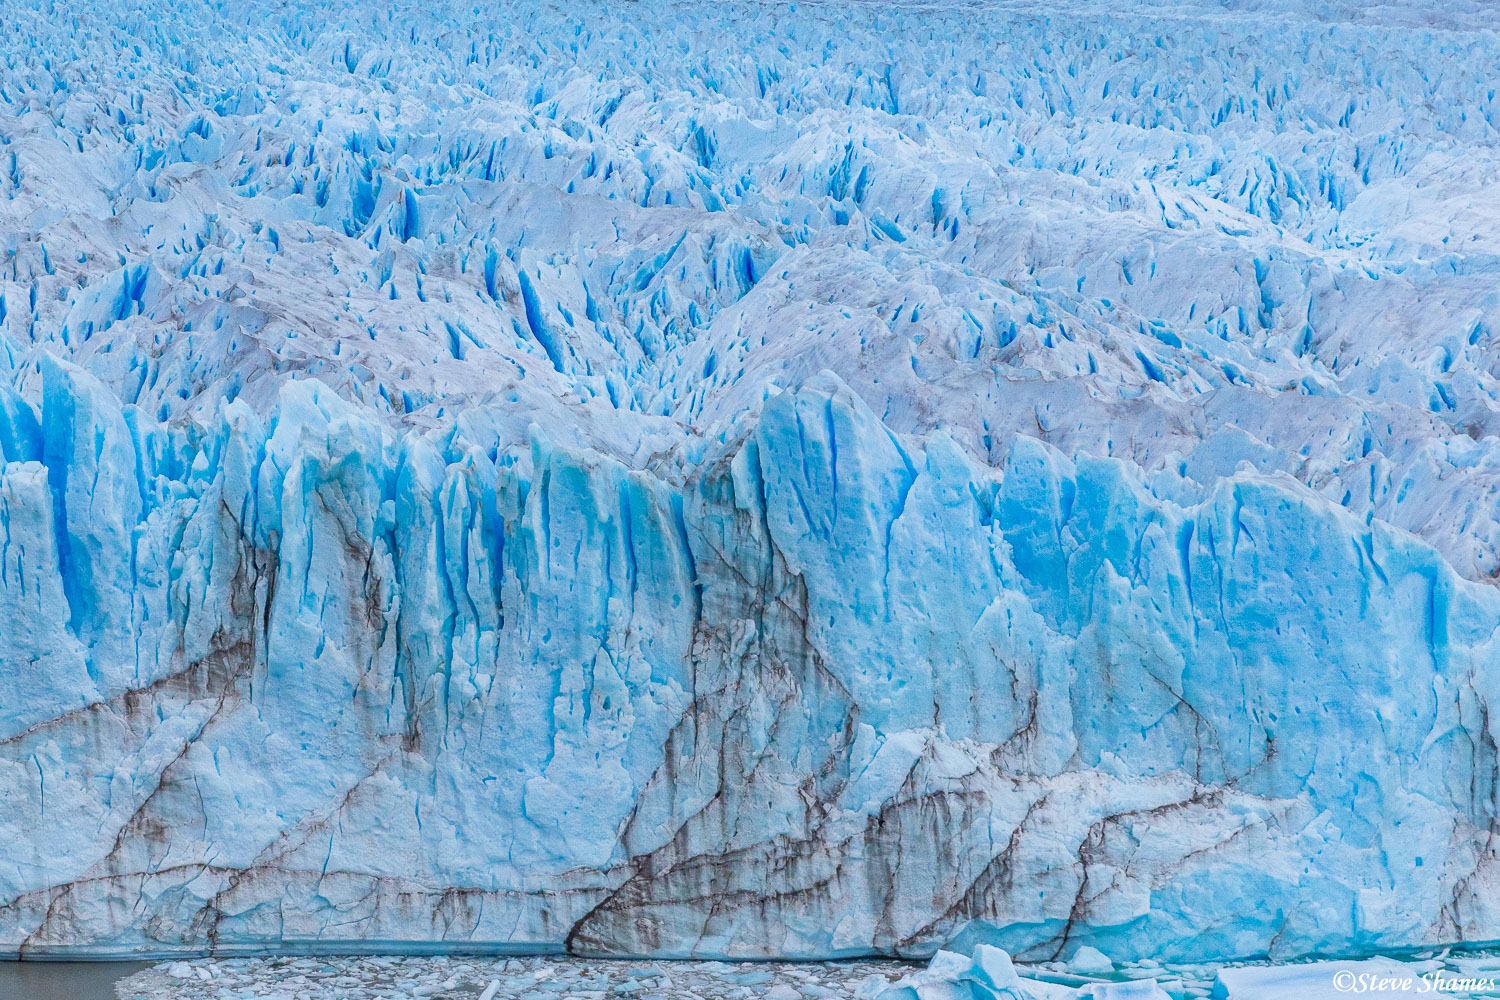 And here is Perito Moreno. One of the biggest glaciers in Patagonia.